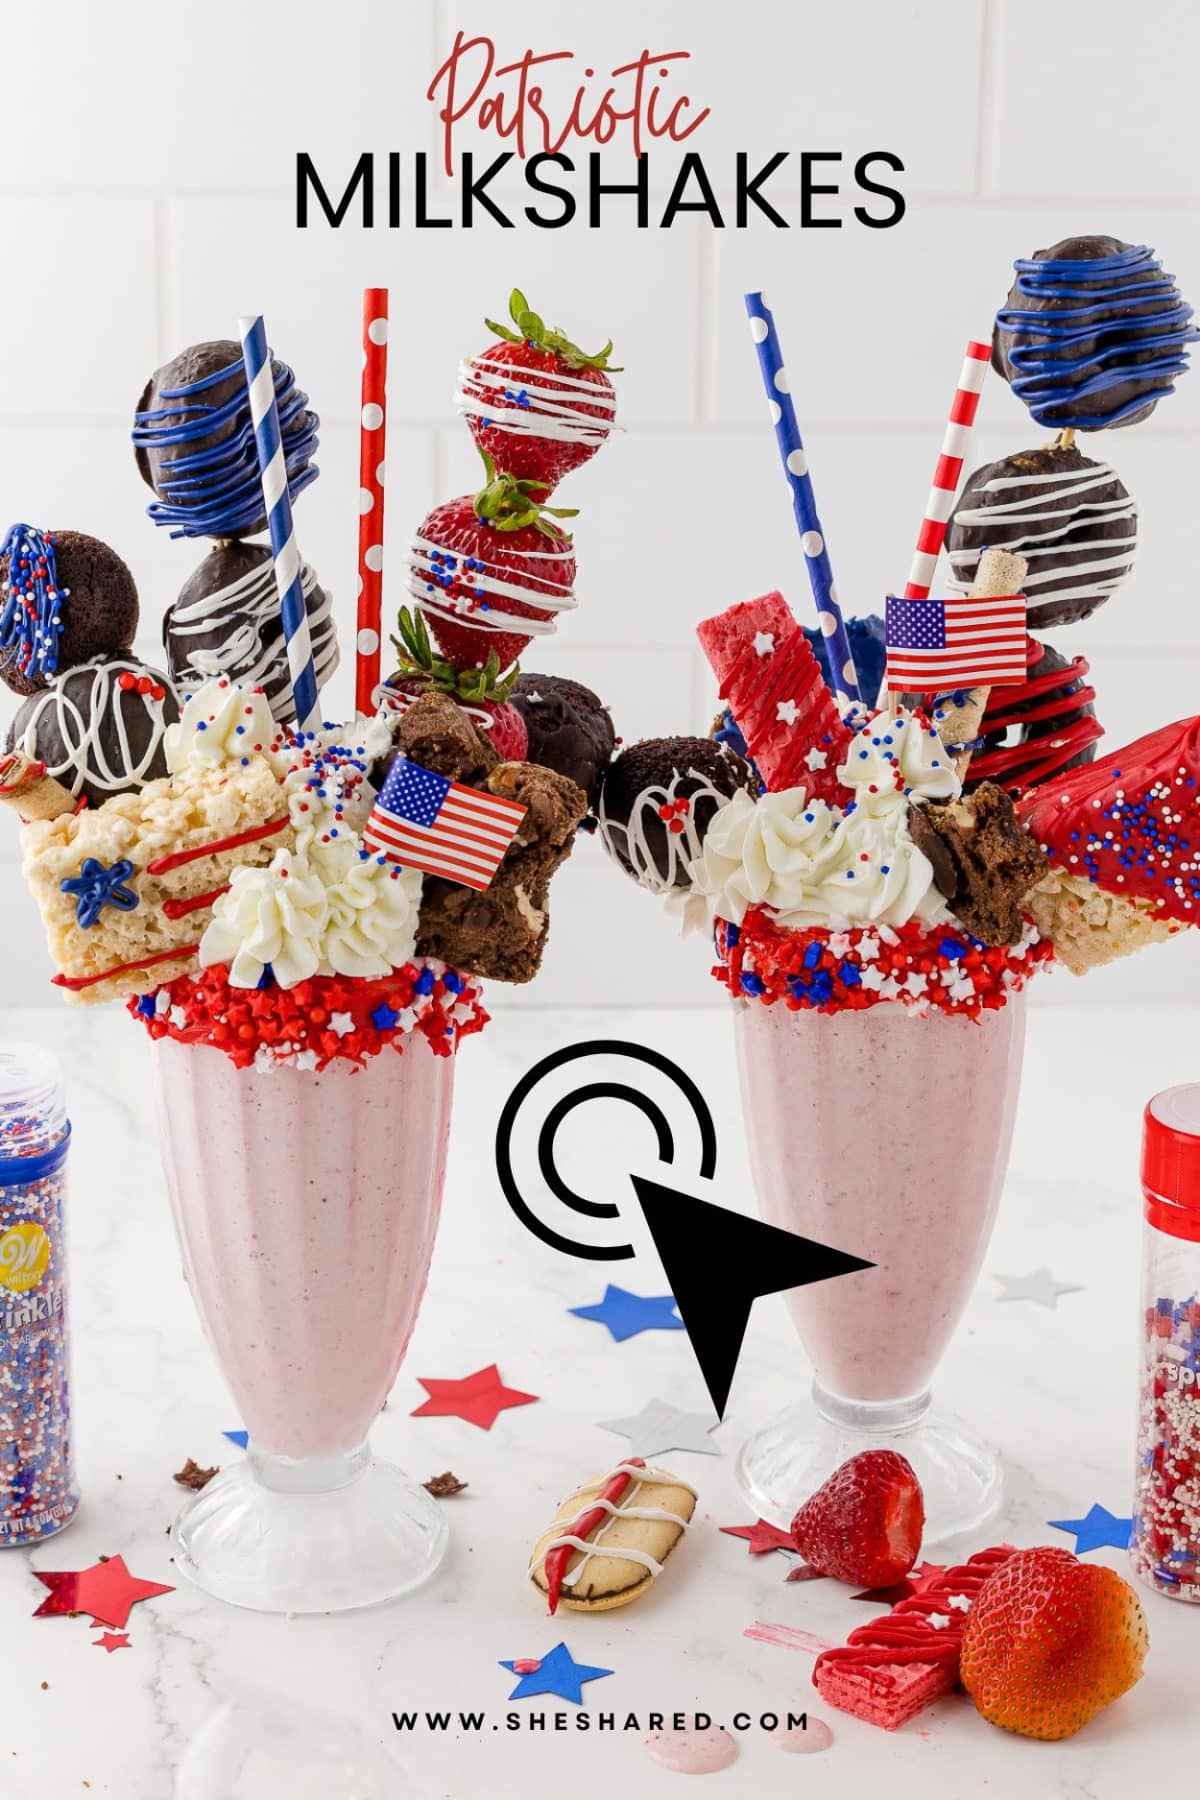 pinterest image of two strawberry shakes with patriotic themed cookies stacked on top.